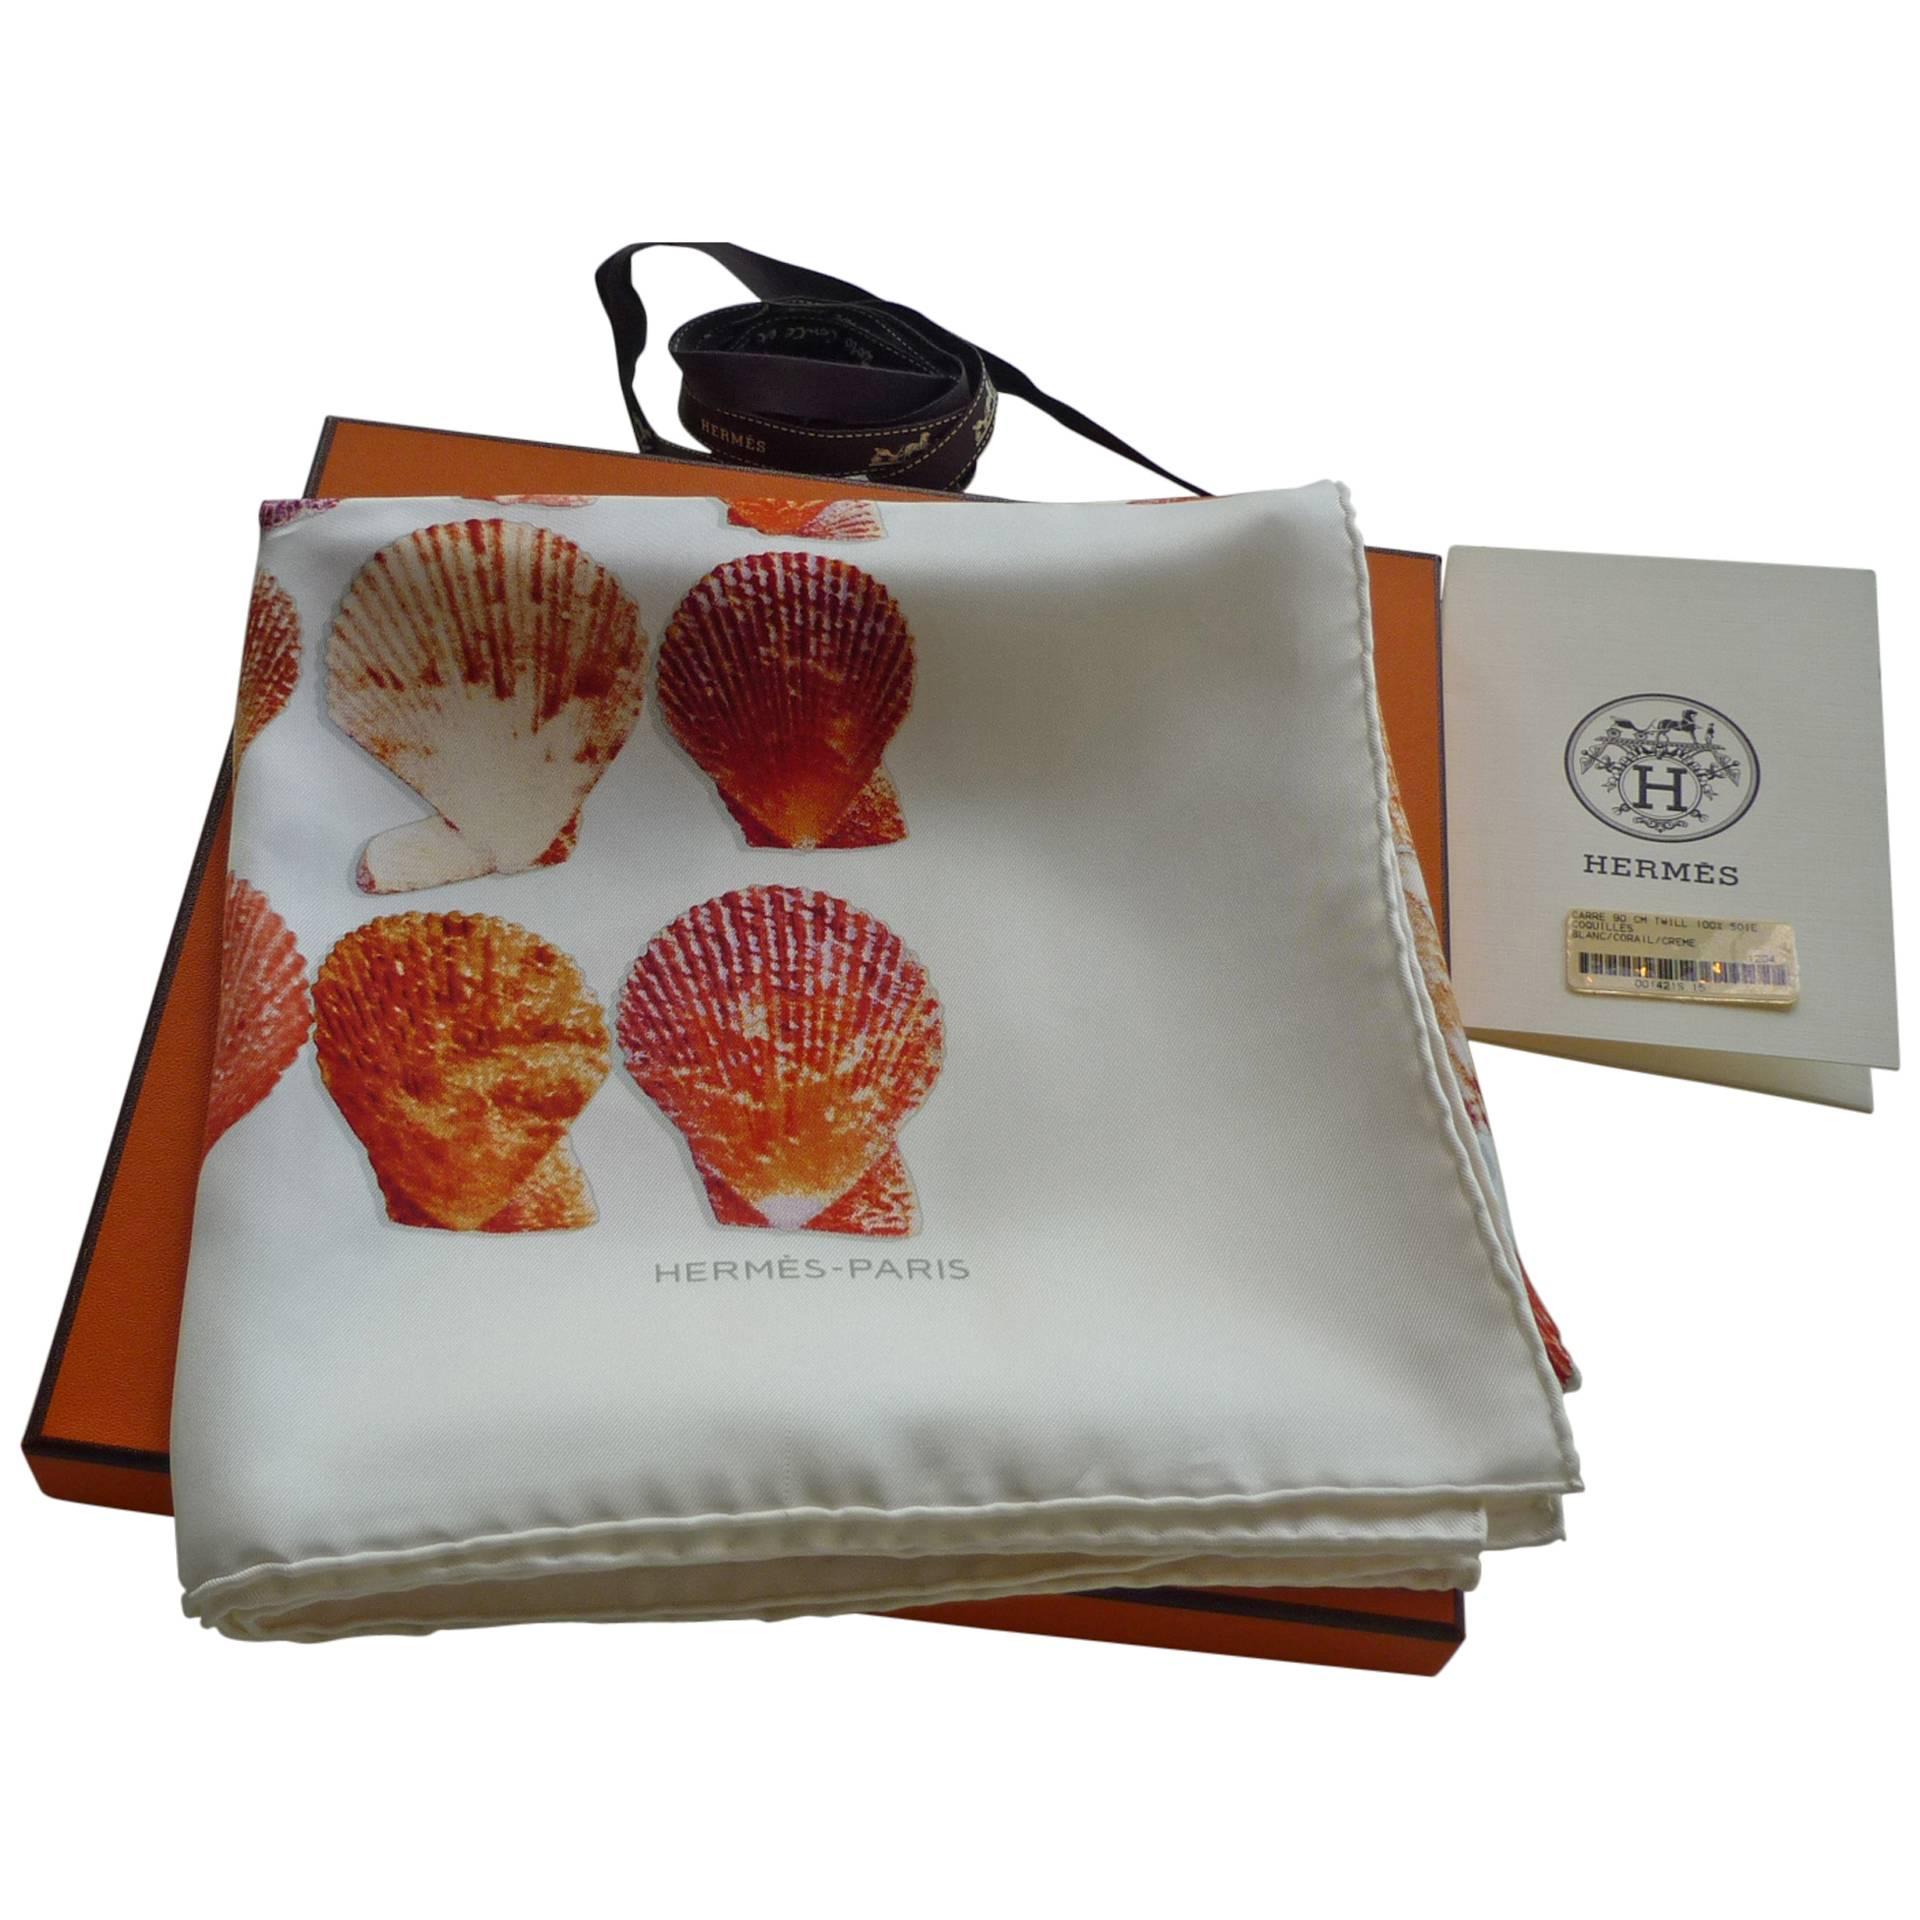 Hermes "Coquilles" by Robert Delpire Silk Twill Scarf NWT, Box and Ribbon